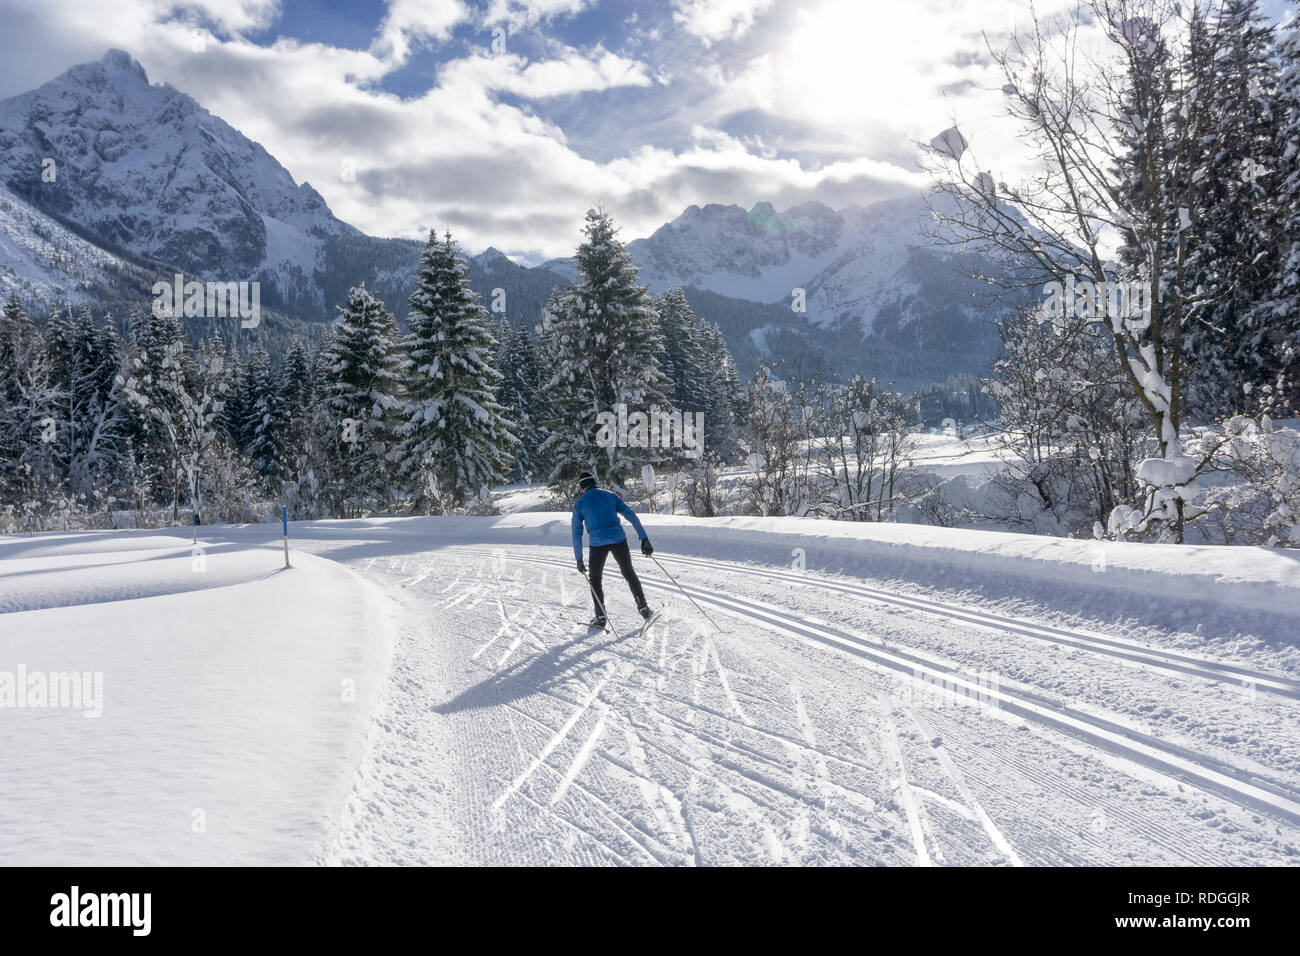 Single cross country skier on groomed ski track, sunny winter day with white clouds on blue sky. Winter mountain landscape, Ehrwald, Tirol, Austria Stock Photo